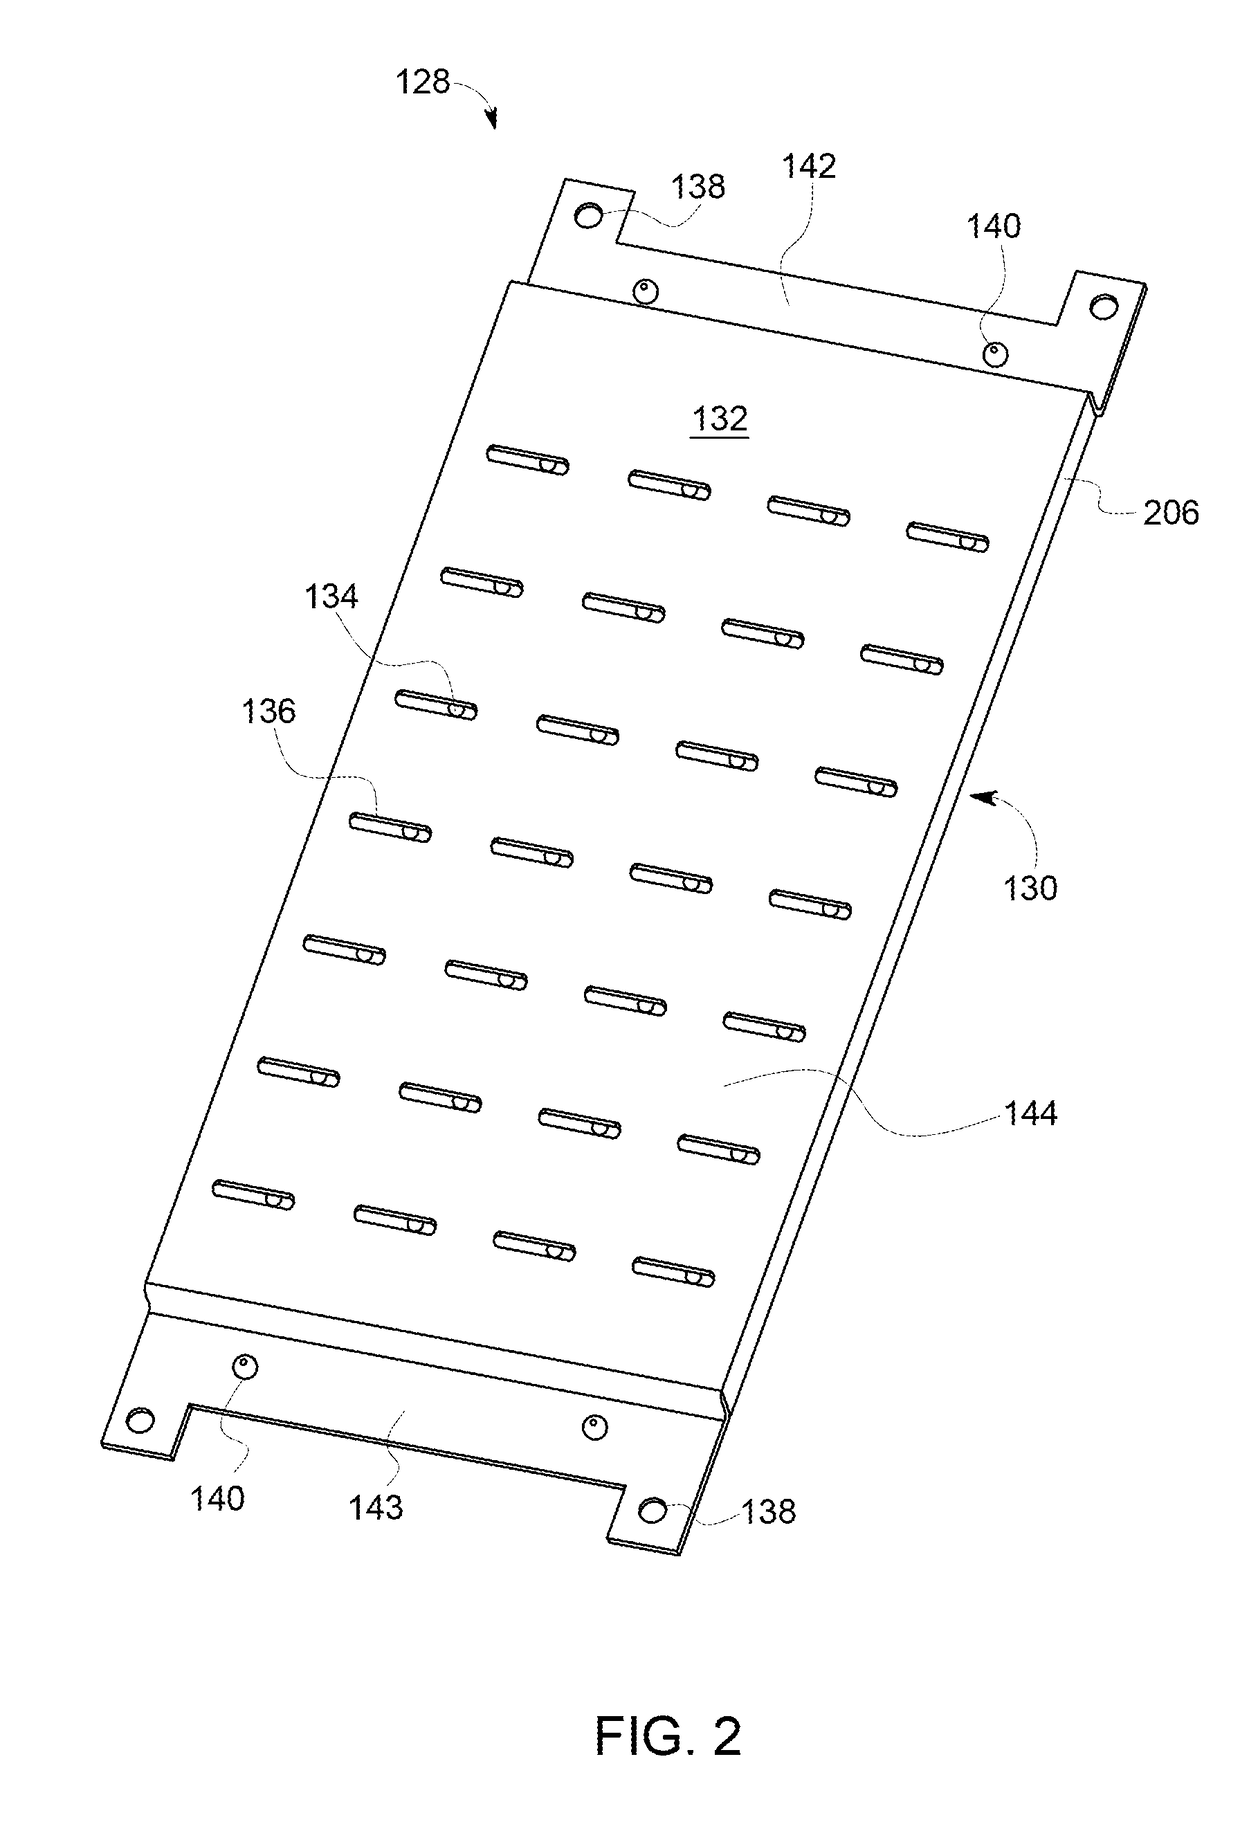 Intra-compartment cooling channel component for a metal-clad switchgear assembly